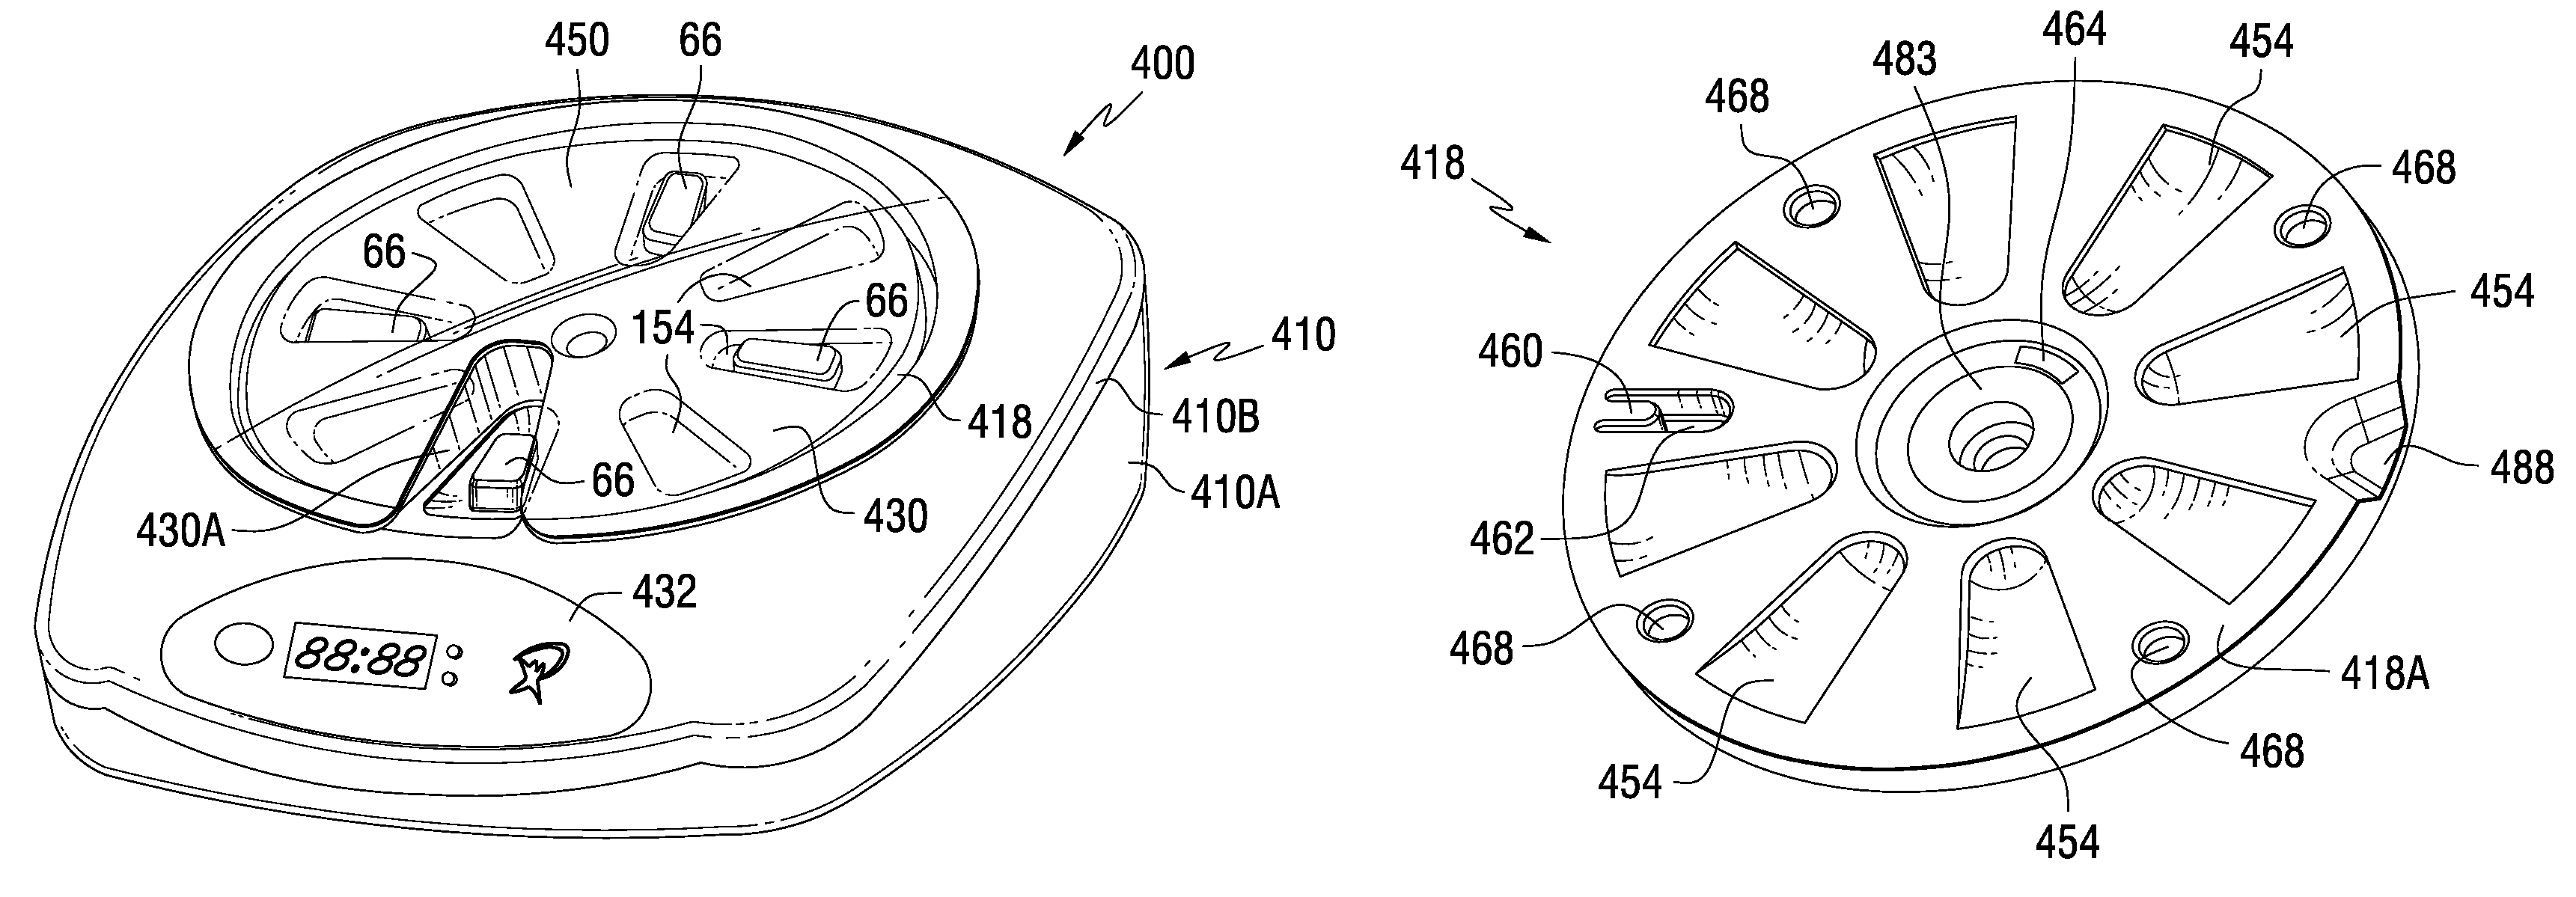 Tray insert for medication on demand device